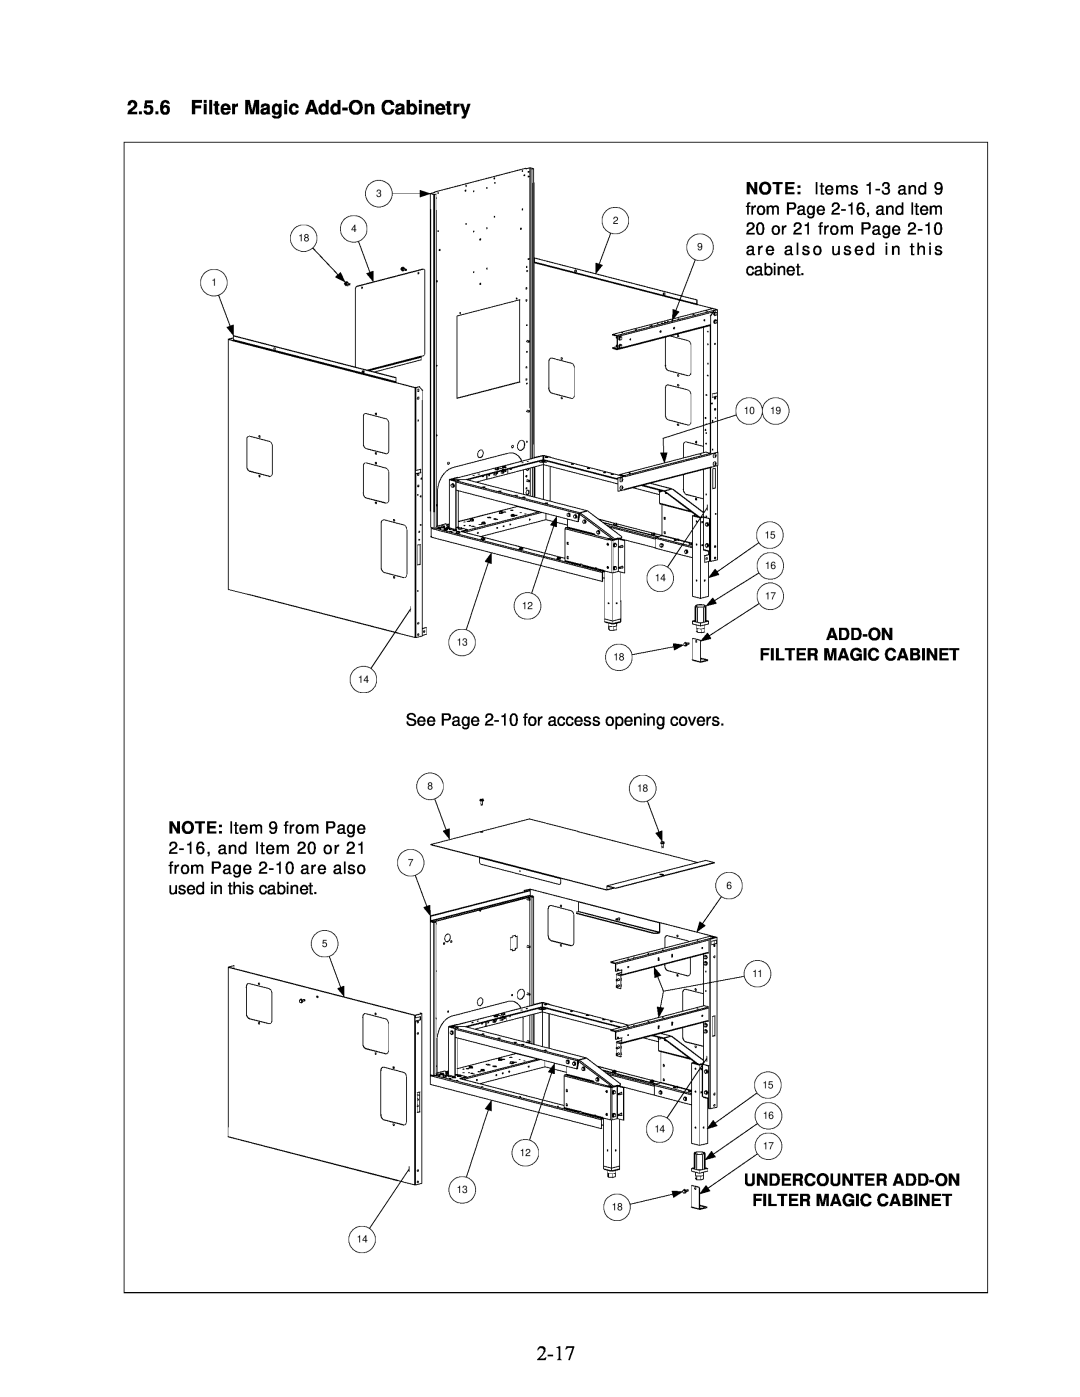 Frymaster H50 Series manual 2.5.6Filter Magic Add-OnCabinetry, NOTE: Items 1-3and 9 from Page 2-16,and Item 